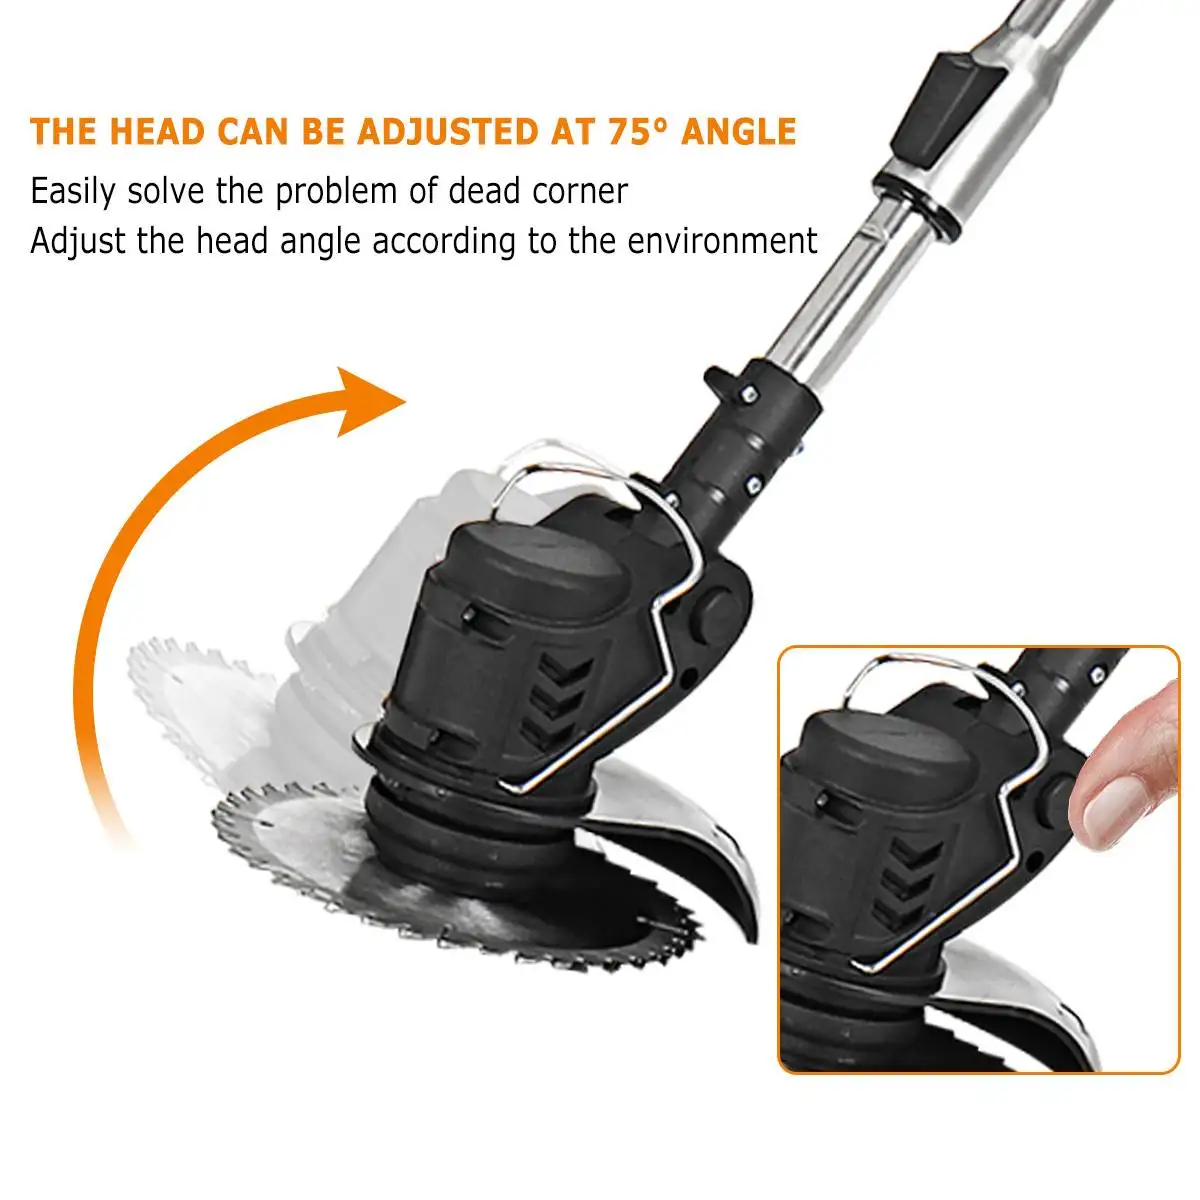 2000W Electric Grass Trimmer Cordless Lawn Mower Hedge Trimmer Adjustable Handheld Garden Pruning Power Tool with 98V Battery